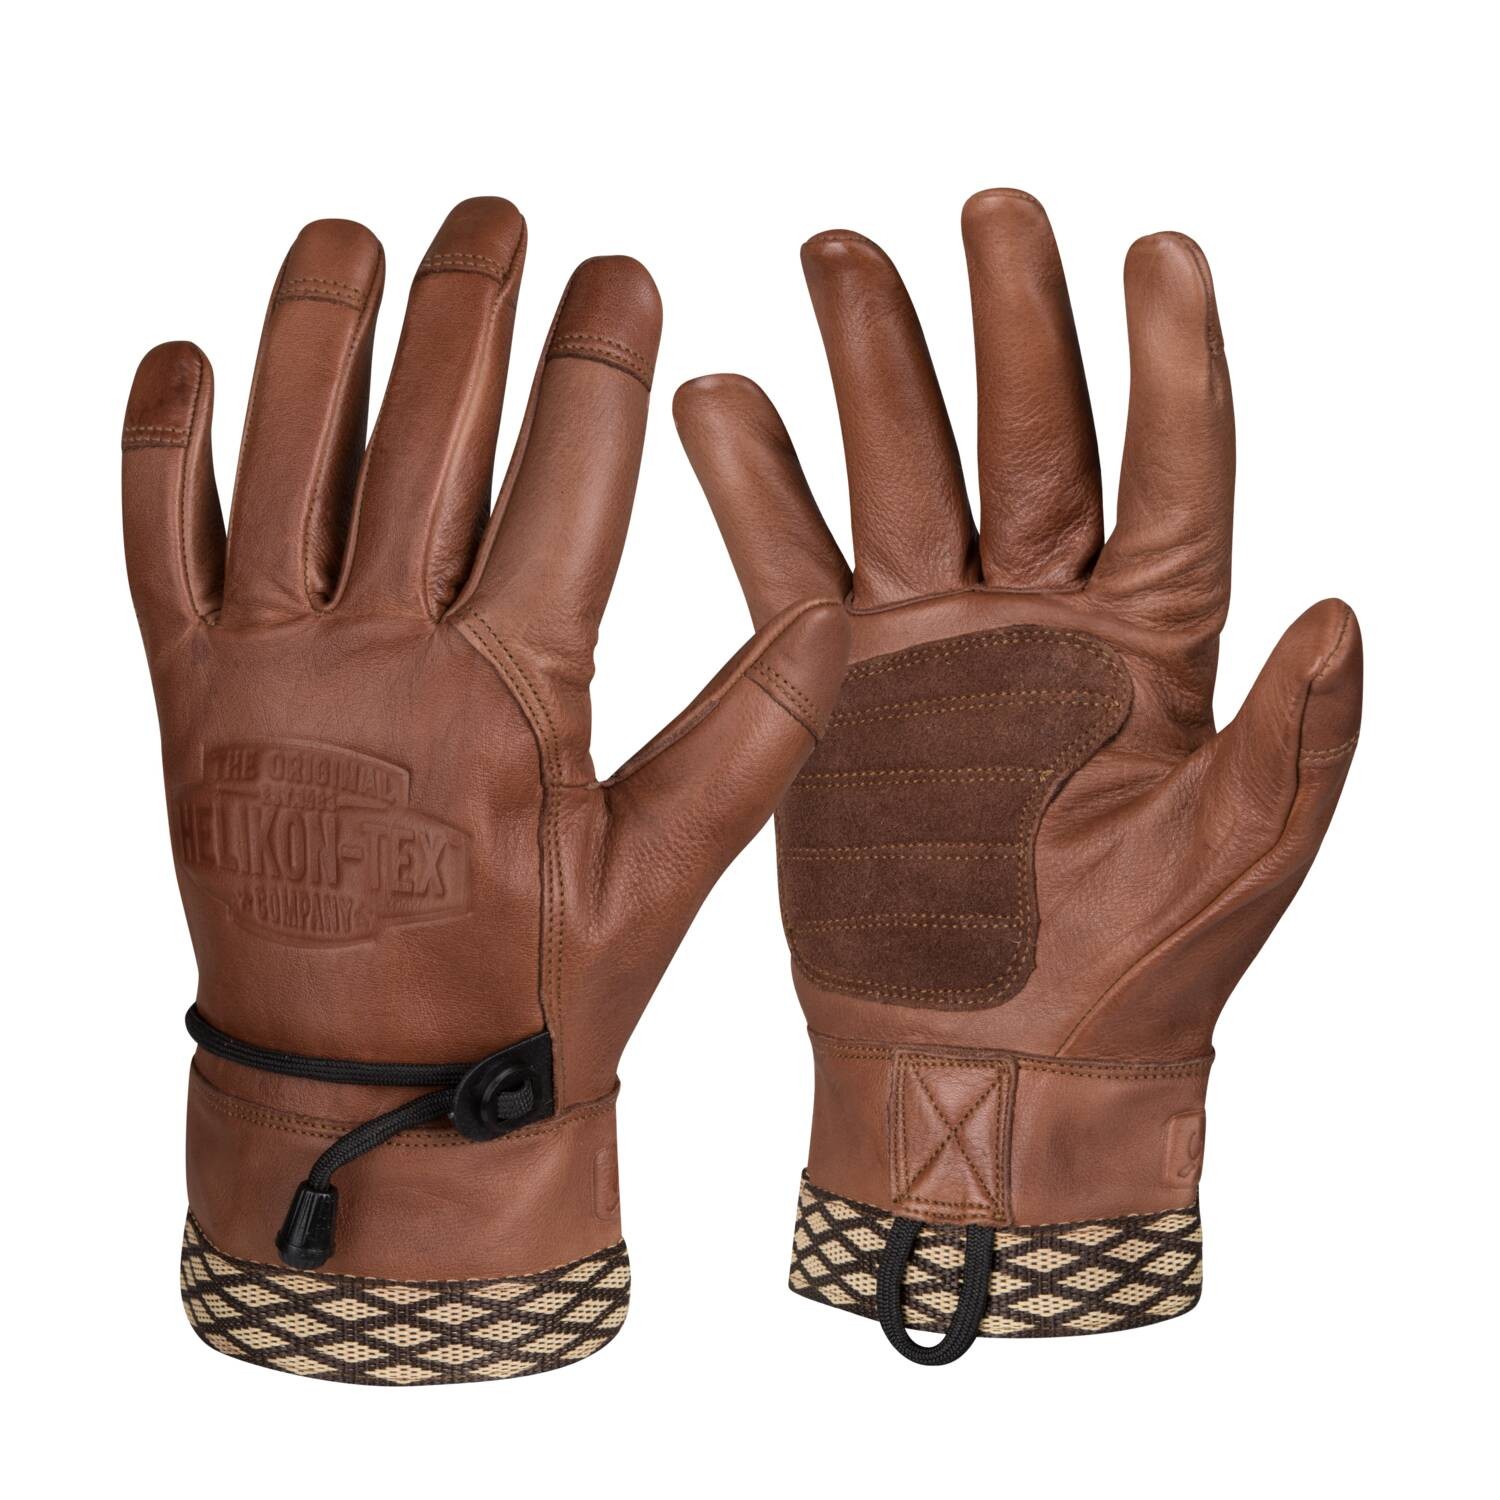 Woodcrafter Gloves Helikon Tex